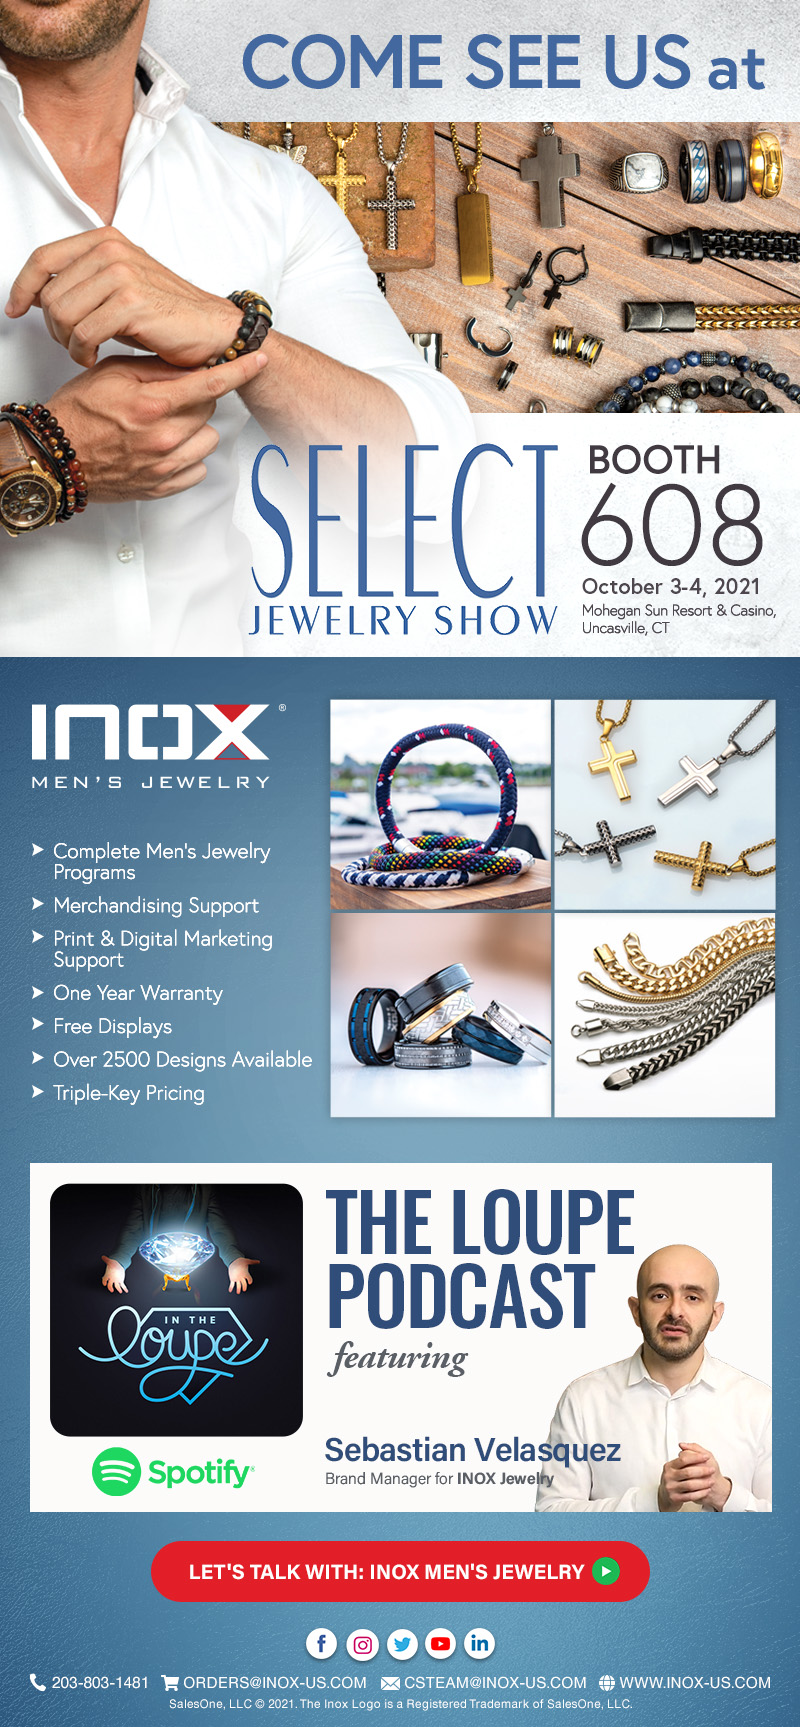 Come see us at Select Jewelry Show Booth 608!